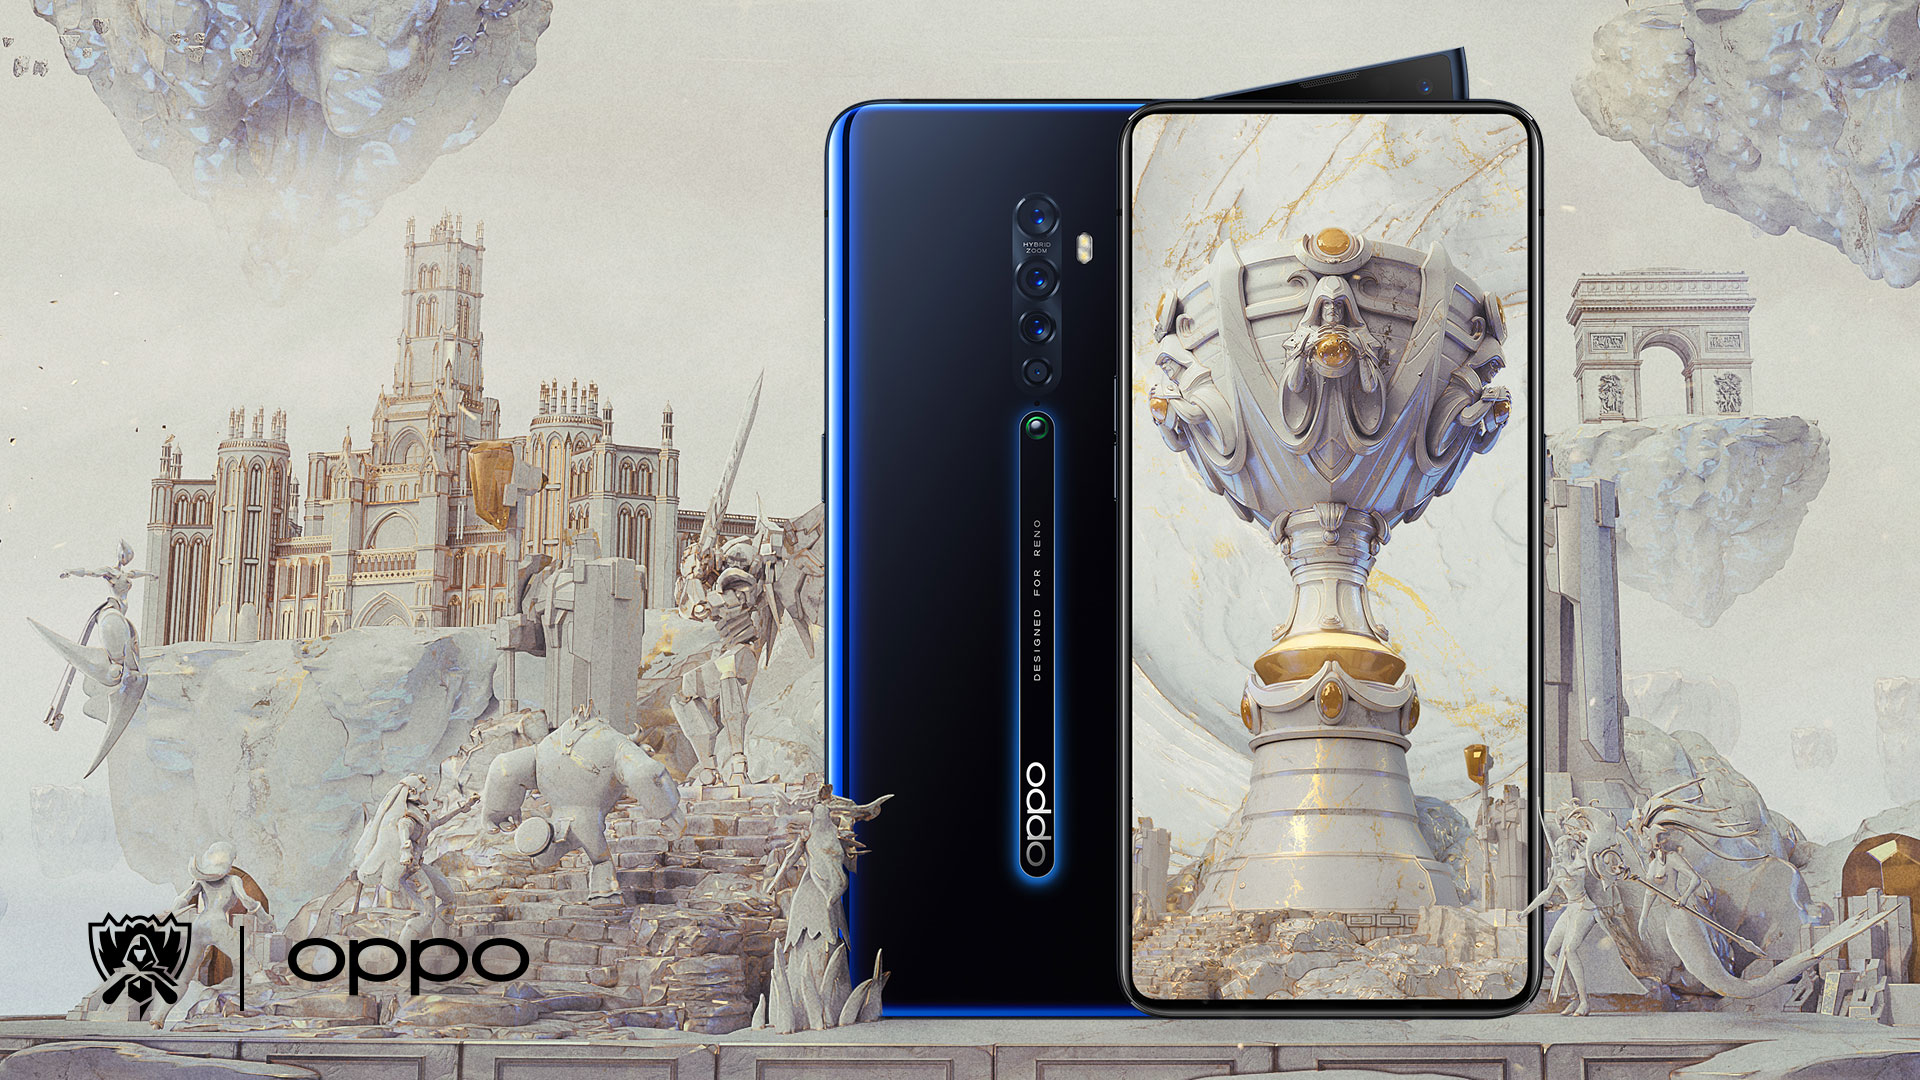 OPPO Joins LoL Esports as New Global Partner – League of Legends